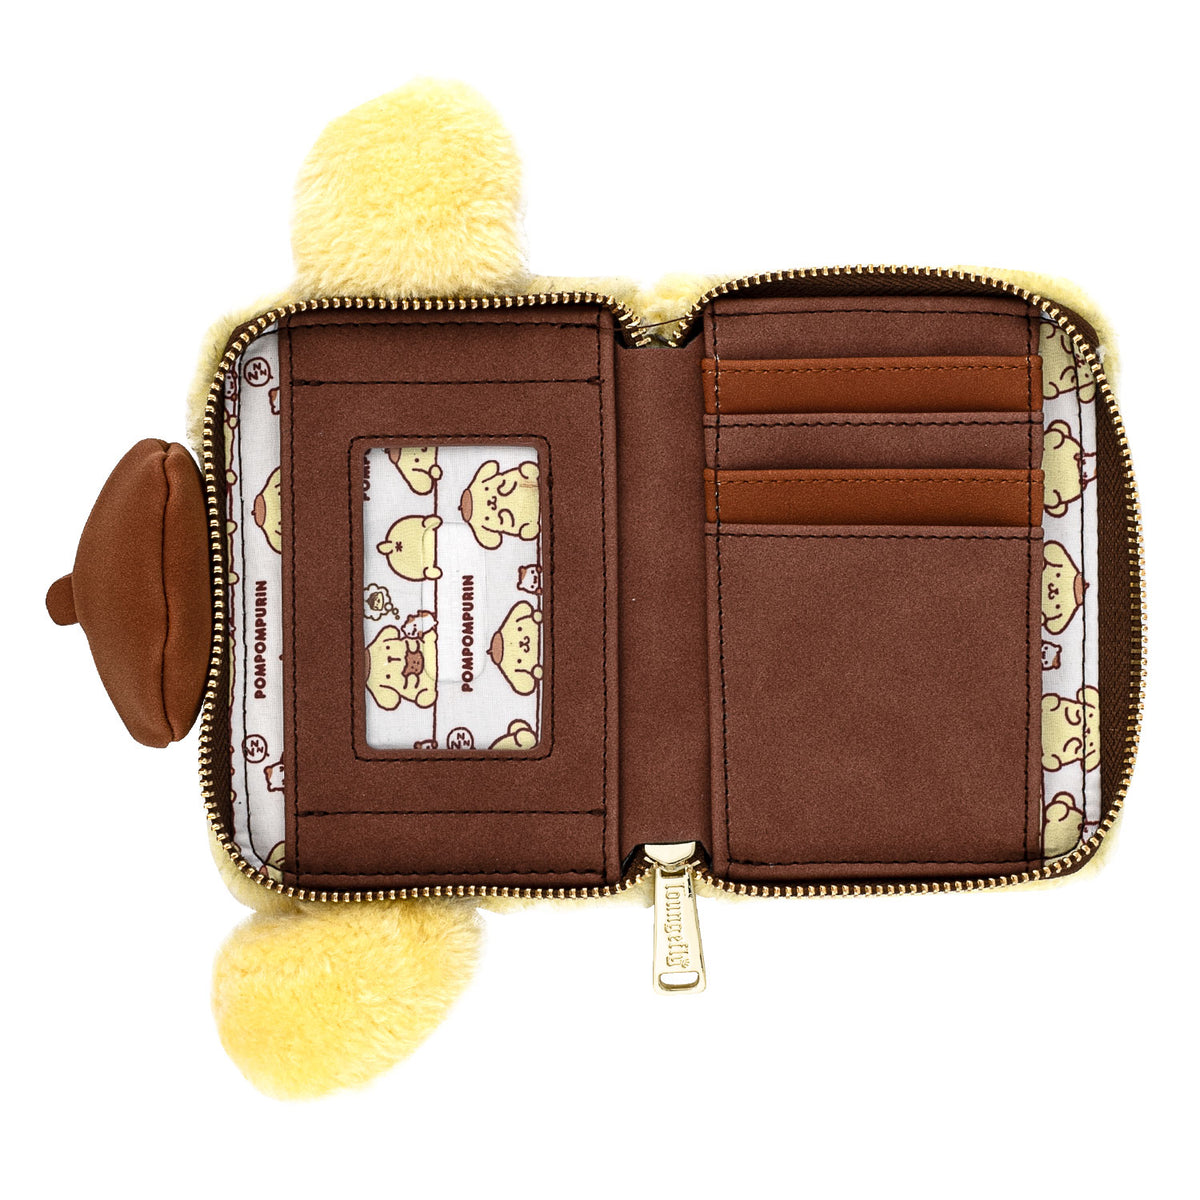 Pompompurin x Loungefly Plush Wallet Bags Loungefly   